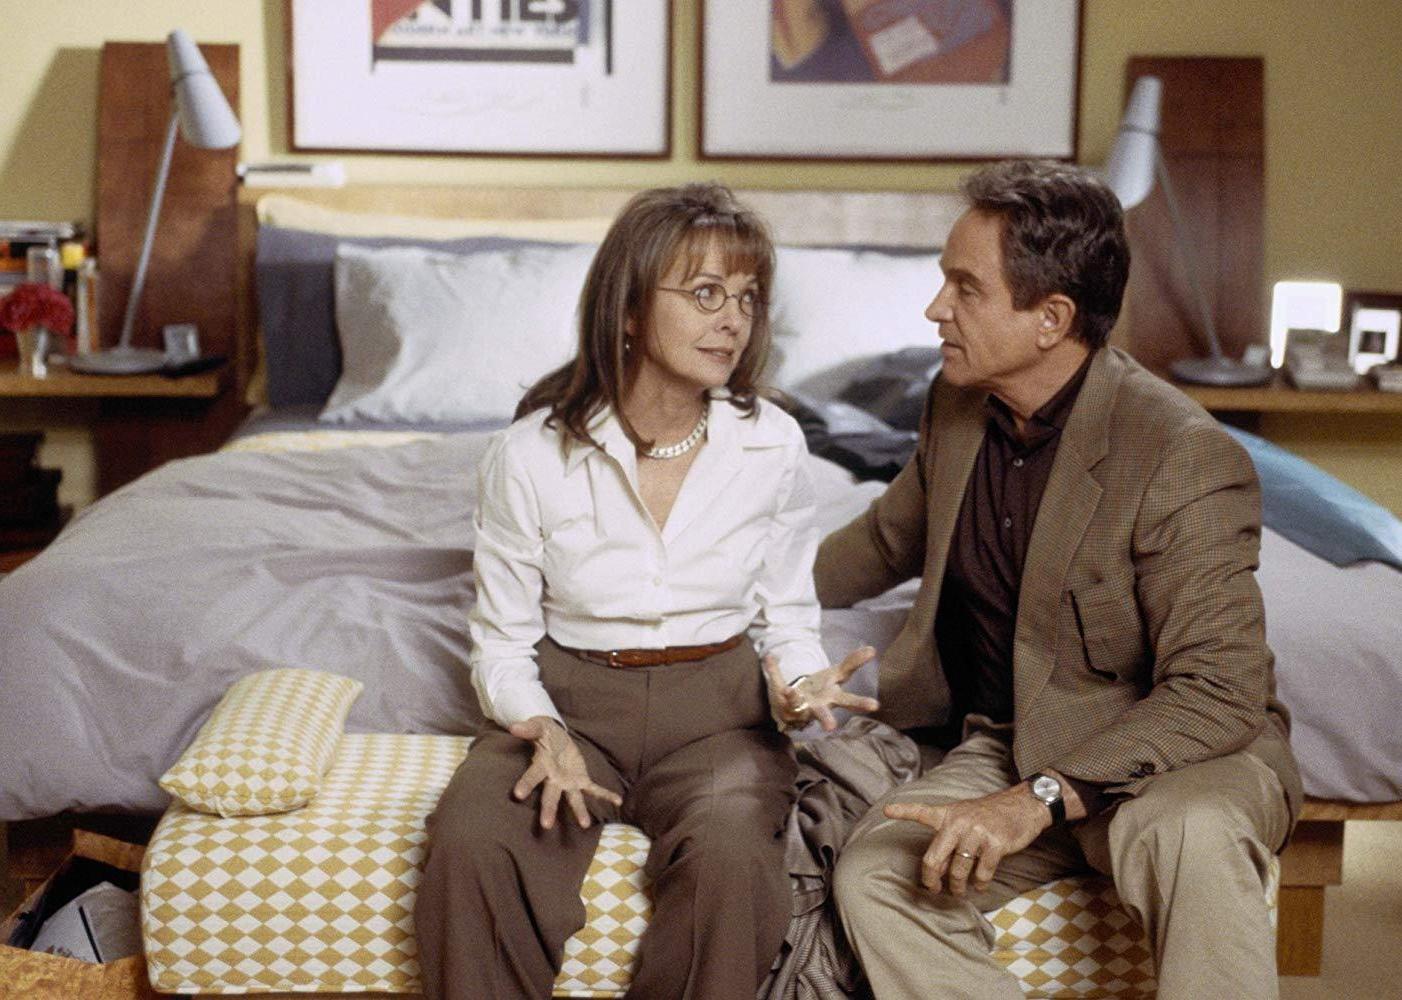 Diane Keaton and Warren Beatty in a scene from "Town & Country"